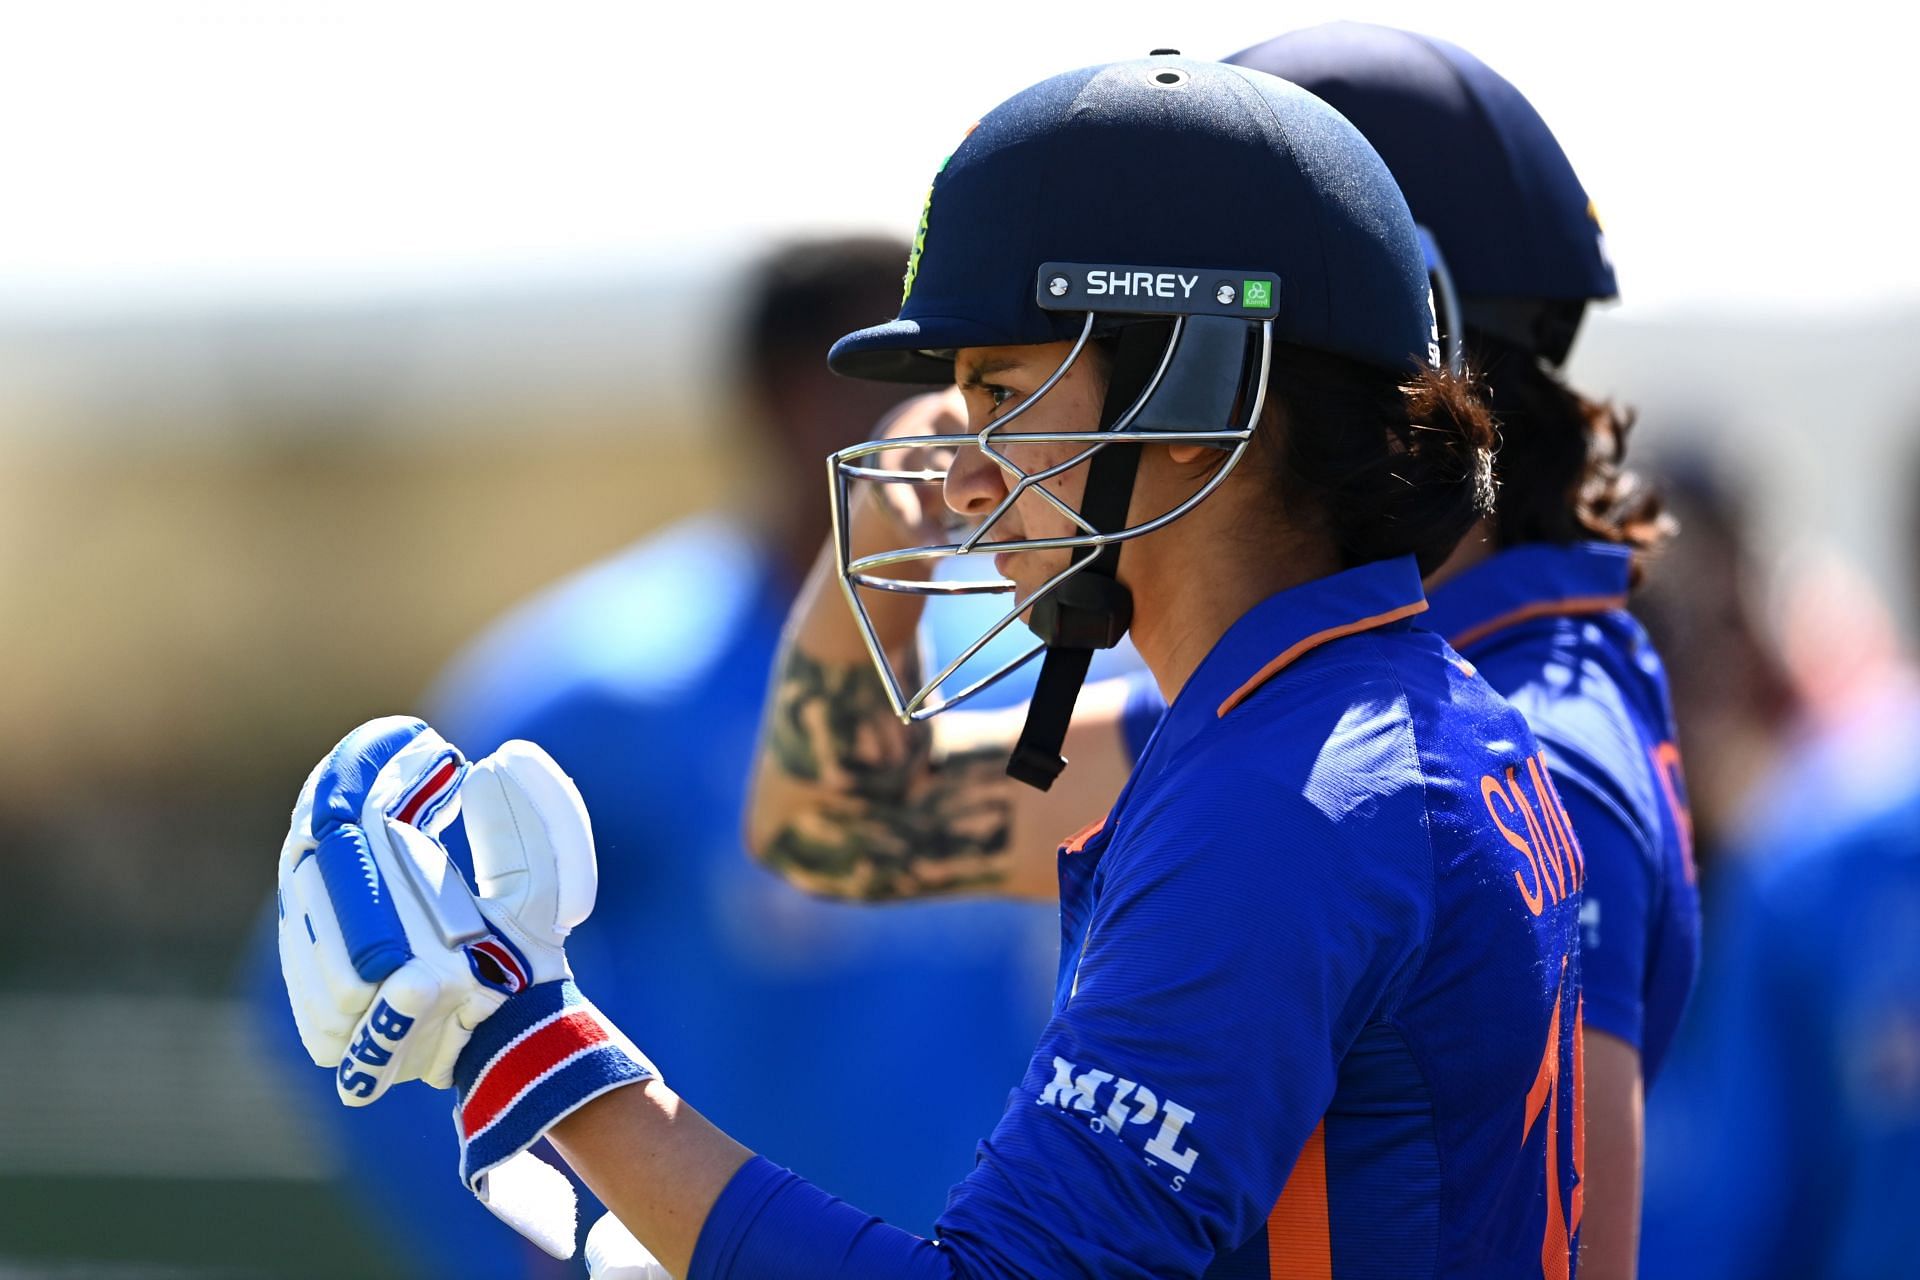 Smriti Mandhana is expected to be a key player for her team.